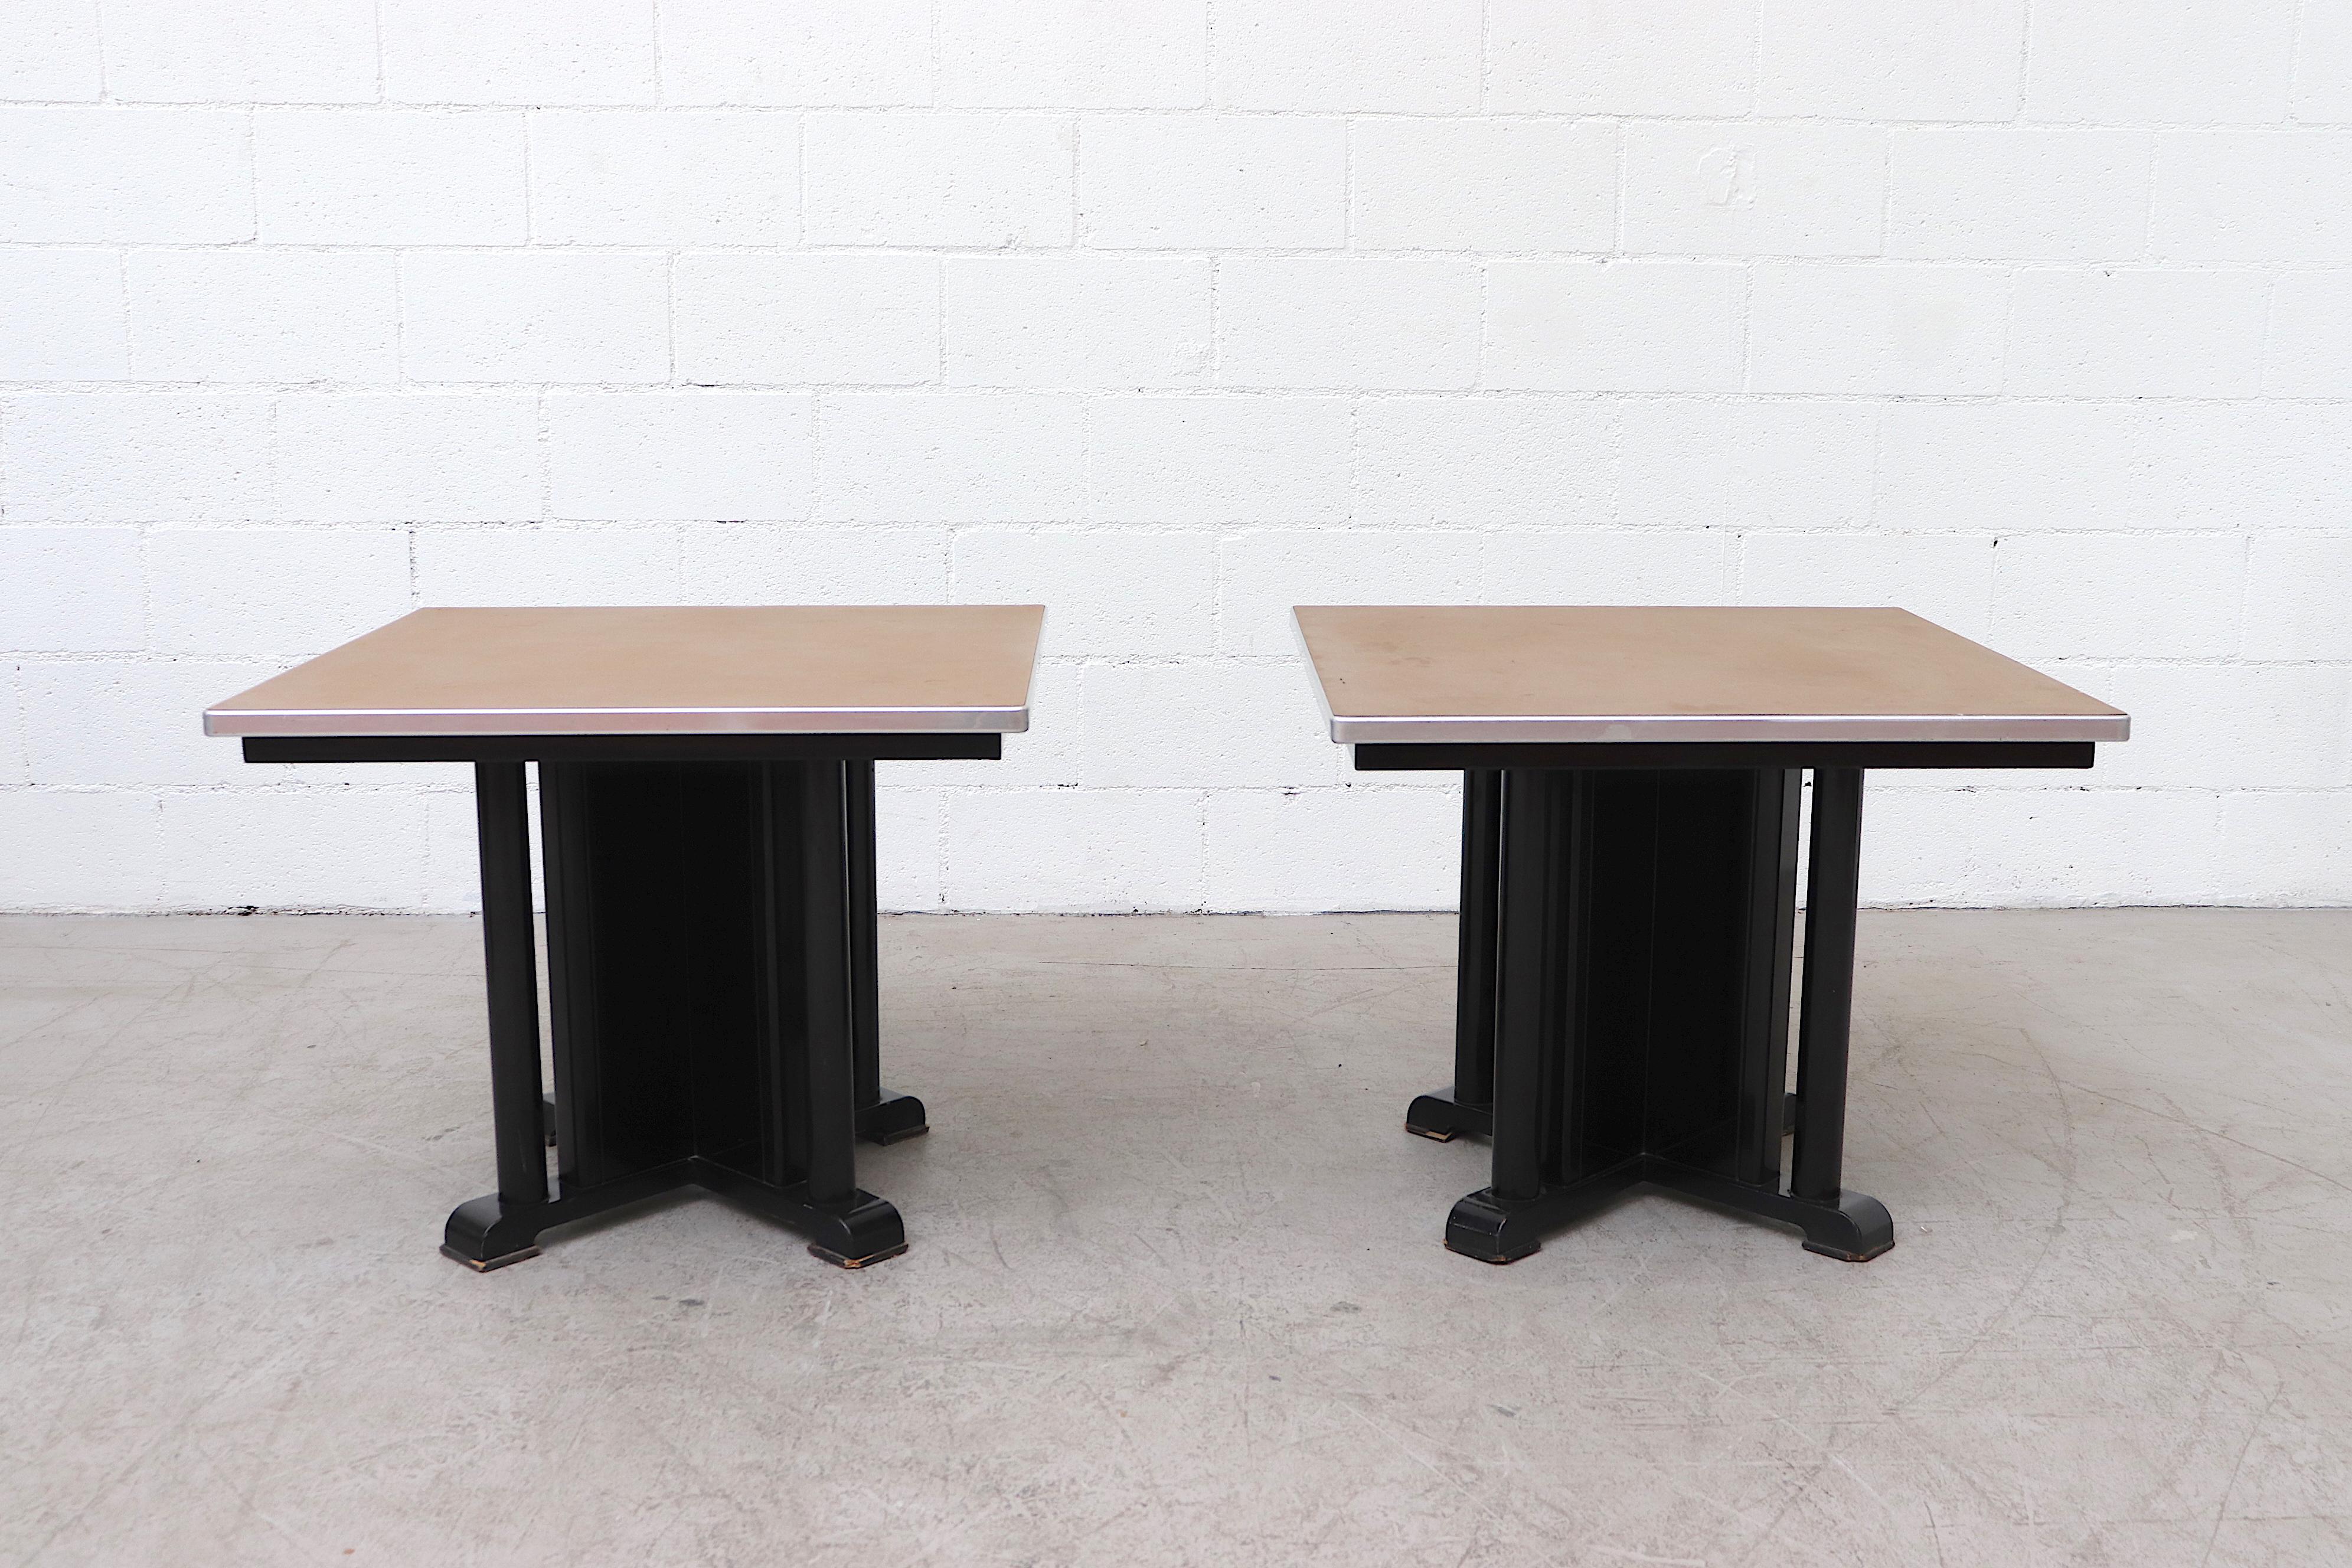 Midcentury gispen industrial side tables with black enameled metal frame and linoleum top with aluminum trim accent and painted wood foot pads. In very original condition and visible wear and scratches, including denting and impressions to the